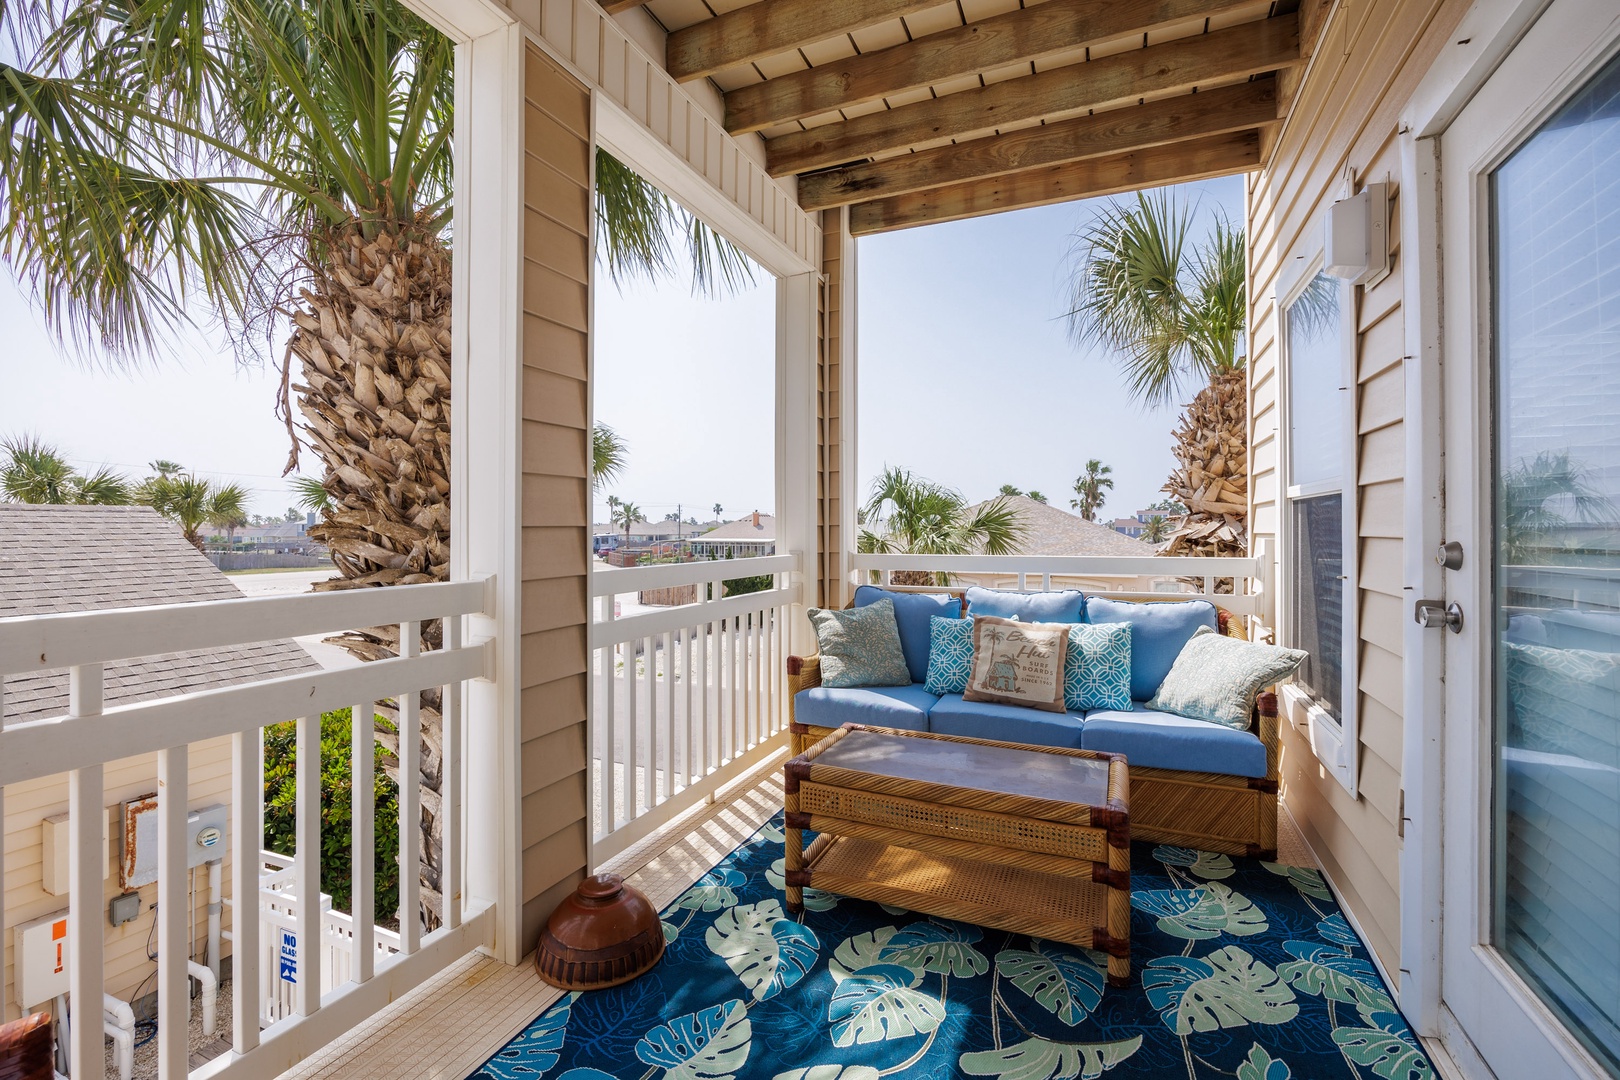 Take a breath of tranquility on the private balcony with pool view